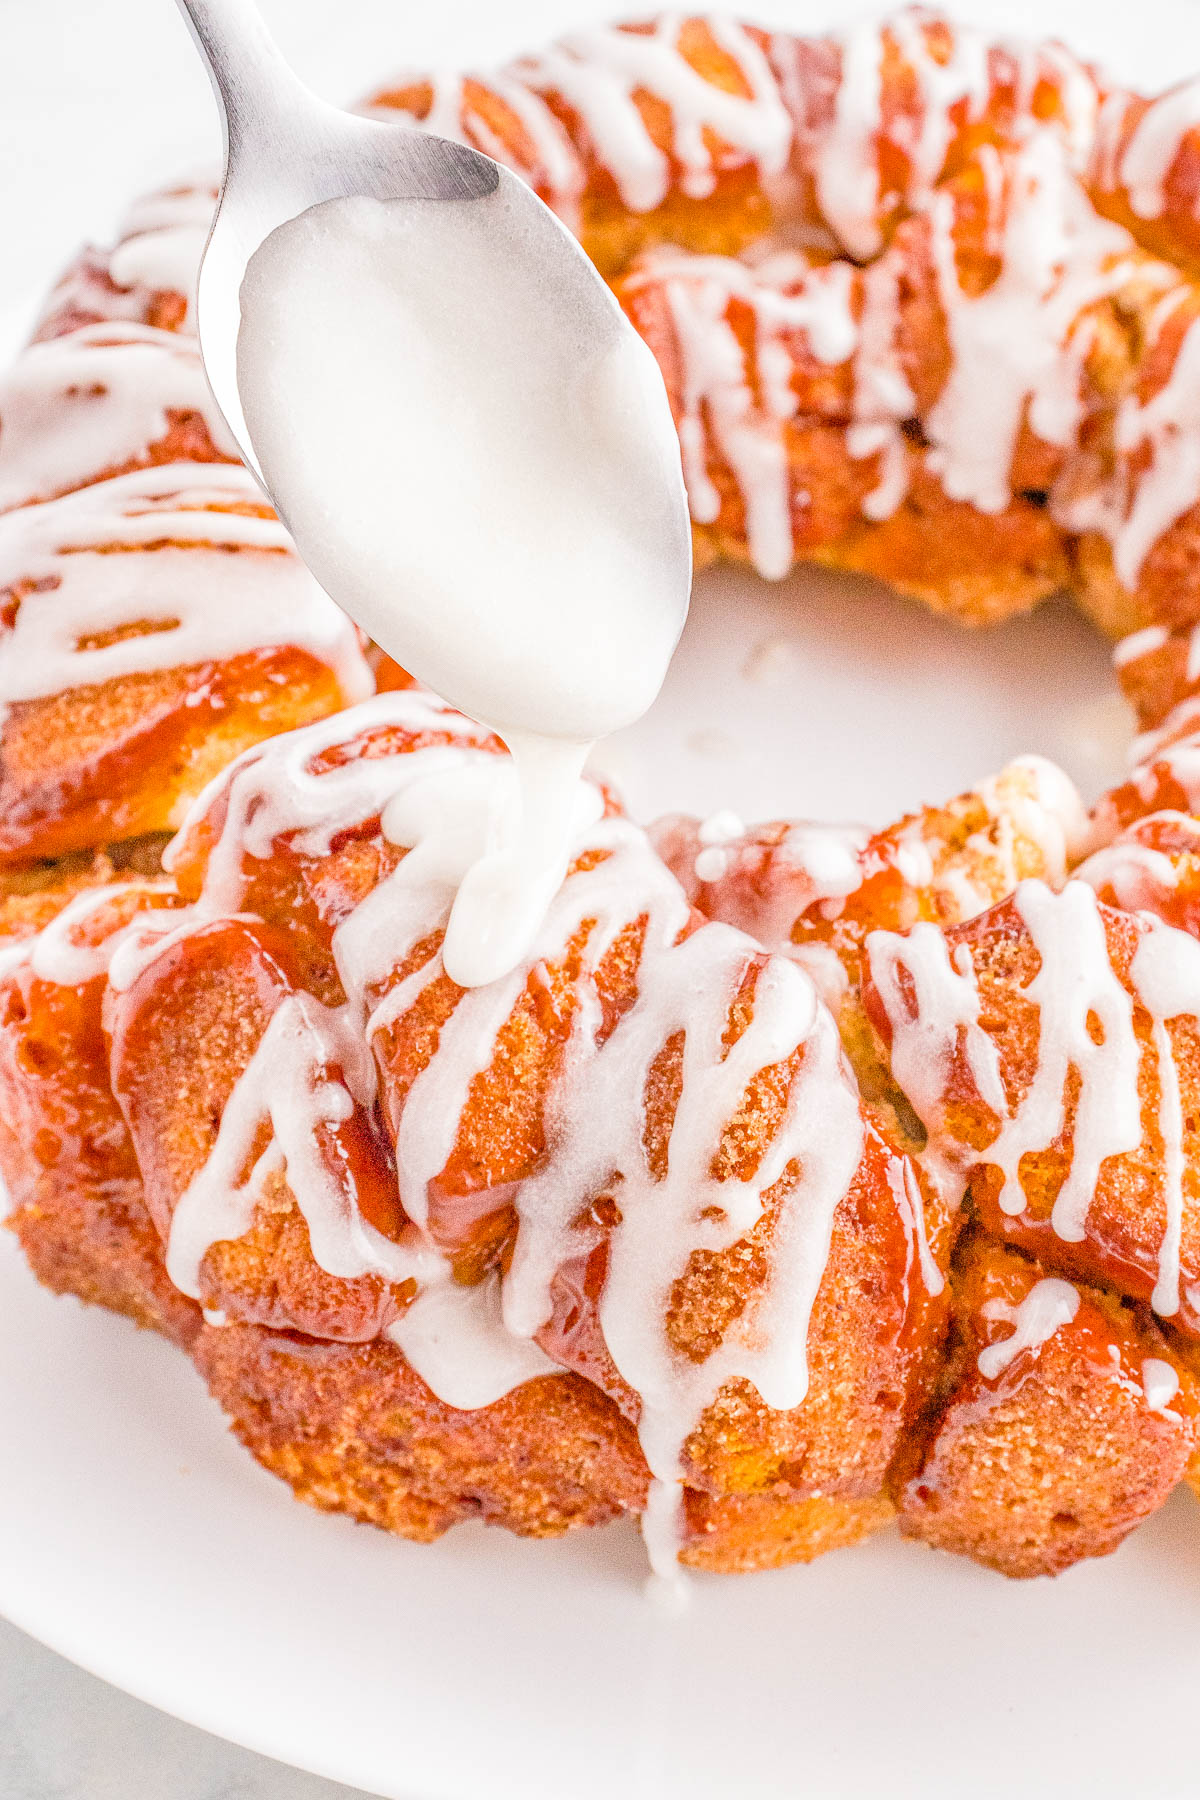 Drizzling icing on a freshly baked cinnamon roll monkey bread on a white plate.